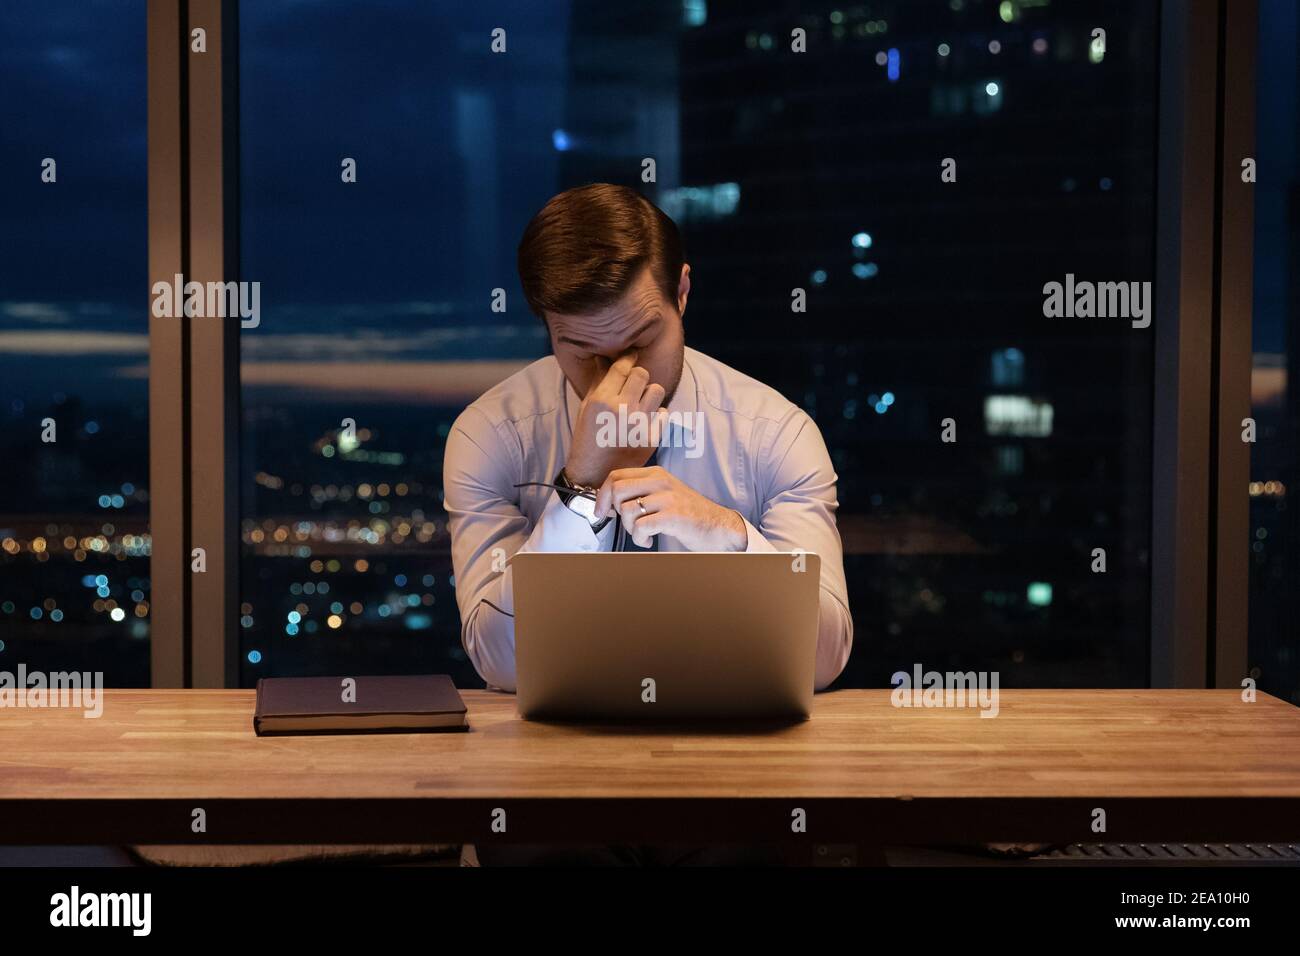 Busy young office employee suffer from chronic dry eye syndrome Stock Photo